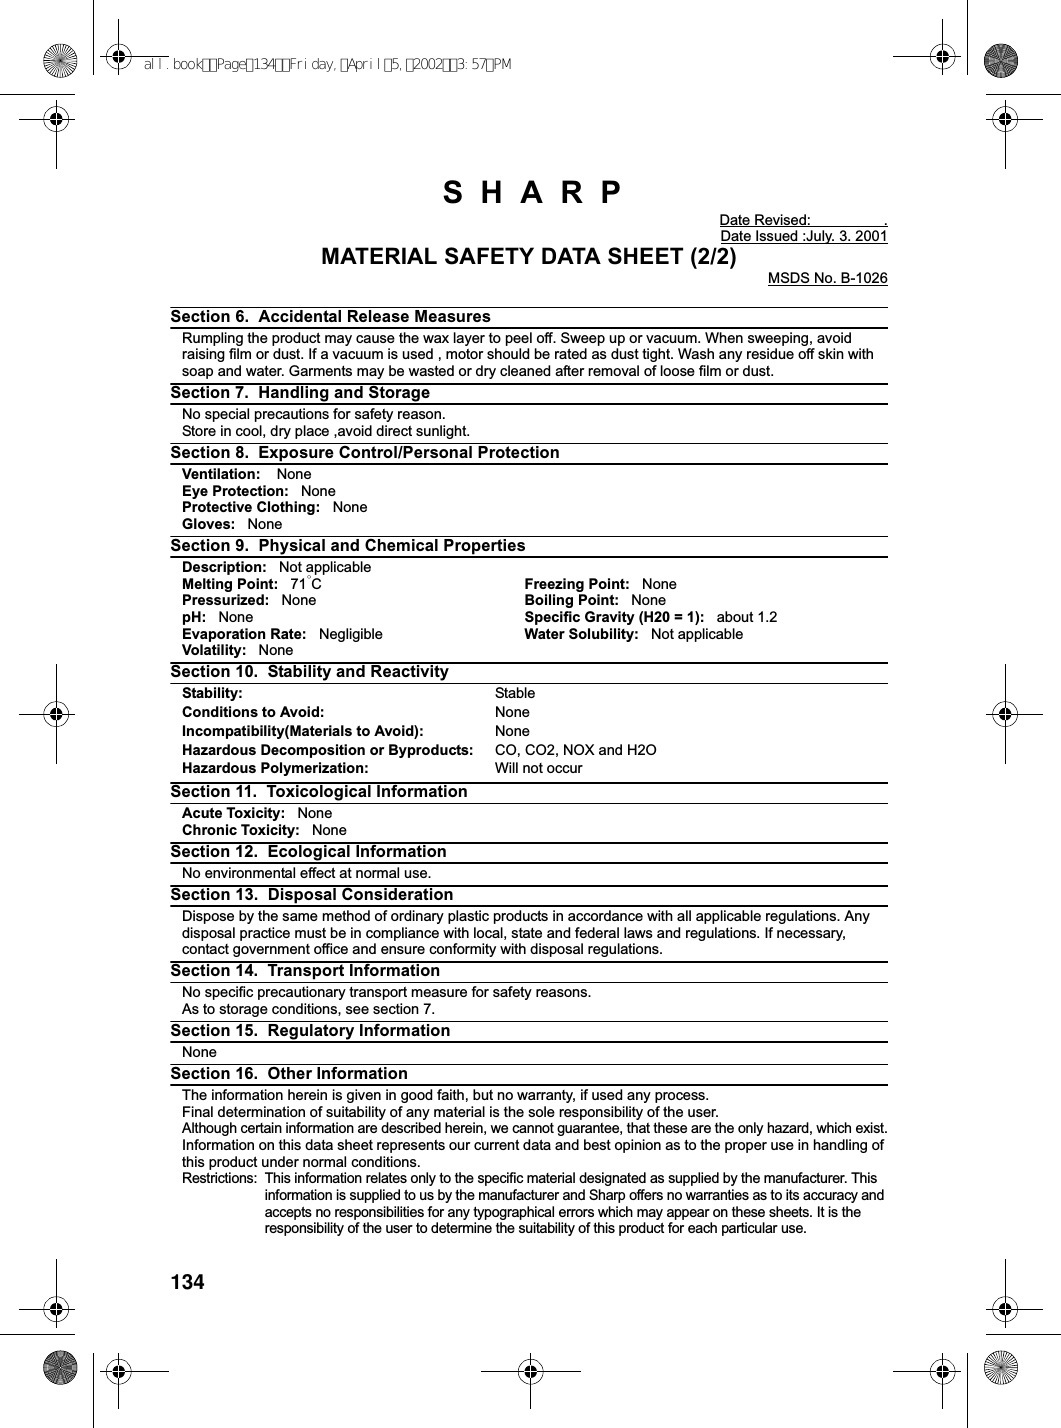 134SHARPDate Revised: .Date Issued :July. 3. 2001MATERIAL SAFETY DATA SHEET (2/2)MSDS No. B-1026Section 6. Accidental Release MeasuresRumpling the product may cause the wax layer to peel off. Sweep up or vacuum. When sweeping, avoidraising film or dust. If a vacuum is used , motor should be rated as dust tight. Wash any residue off skin withsoap and water. Garments may be wasted or dry cleaned after removal of loose film or dust.Section 7. Handling and StorageNo special precautions for safety reason.Store in cool, dry place ,avoid direct sunlight.Section 8. Exposure Control/Personal ProtectionVentilation: NoneEye Protection: NoneProtective Clothing: NoneGloves: NoneSection 9. Physical and Chemical PropertiesDescription: Not applicableMelting Point: 71°CFreezing Point: NonePressurized: None Boiling Point: NonepH: None Specific Gravity (H20 = 1): about 1.2Evaporation Rate: Negligible Water Solubility: Not applicableVolatility: NoneSection 10. Stability and ReactivityStability: StableConditions to Avoid: NoneIncompatibility(Materials to Avoid): NoneHazardous Decomposition or Byproducts: CO, CO2, NOX and H2OHazardous Polymerization: Will not occurSection 11. Toxicological InformationAcute Toxicity: NoneChronic Toxicity: NoneSection 12. Ecological InformationNo environmental effect at normal use.Section 13. Disposal ConsiderationDispose by the same method of ordinary plastic products in accordance with all applicable regulations. Anydisposal practice must be in compliance with local, state and federal laws and regulations. If necessary,contact government office and ensure conformity with disposal regulations.Section 14. Transport InformationNo specific precautionary transport measure for safety reasons.As to storage conditions, see section 7.Section 15. Regulatory InformationNoneSection 16. Other InformationThe information herein is given in good faith, but no warranty, if used any process.Final determination of suitability of any material is the sole responsibility of the user.Although certain information are described herein, we cannot guarantee, that these are the only hazard, which exist.Information on this data sheet represents our current data and best opinion as to the proper use in handling ofthis product under normal conditions.Restrictions: This information relates only to the specific material designated as supplied by the manufacturer. Thisinformation is supplied to us by the manufacturer and Sharp offers no warranties as to its accuracy andaccepts no responsibilities for any typographical errors which may appear on these sheets. It is theresponsibility of the user to determine the suitability of this product for each particular use.all.bookPage134Friday,April5,20023:57PM